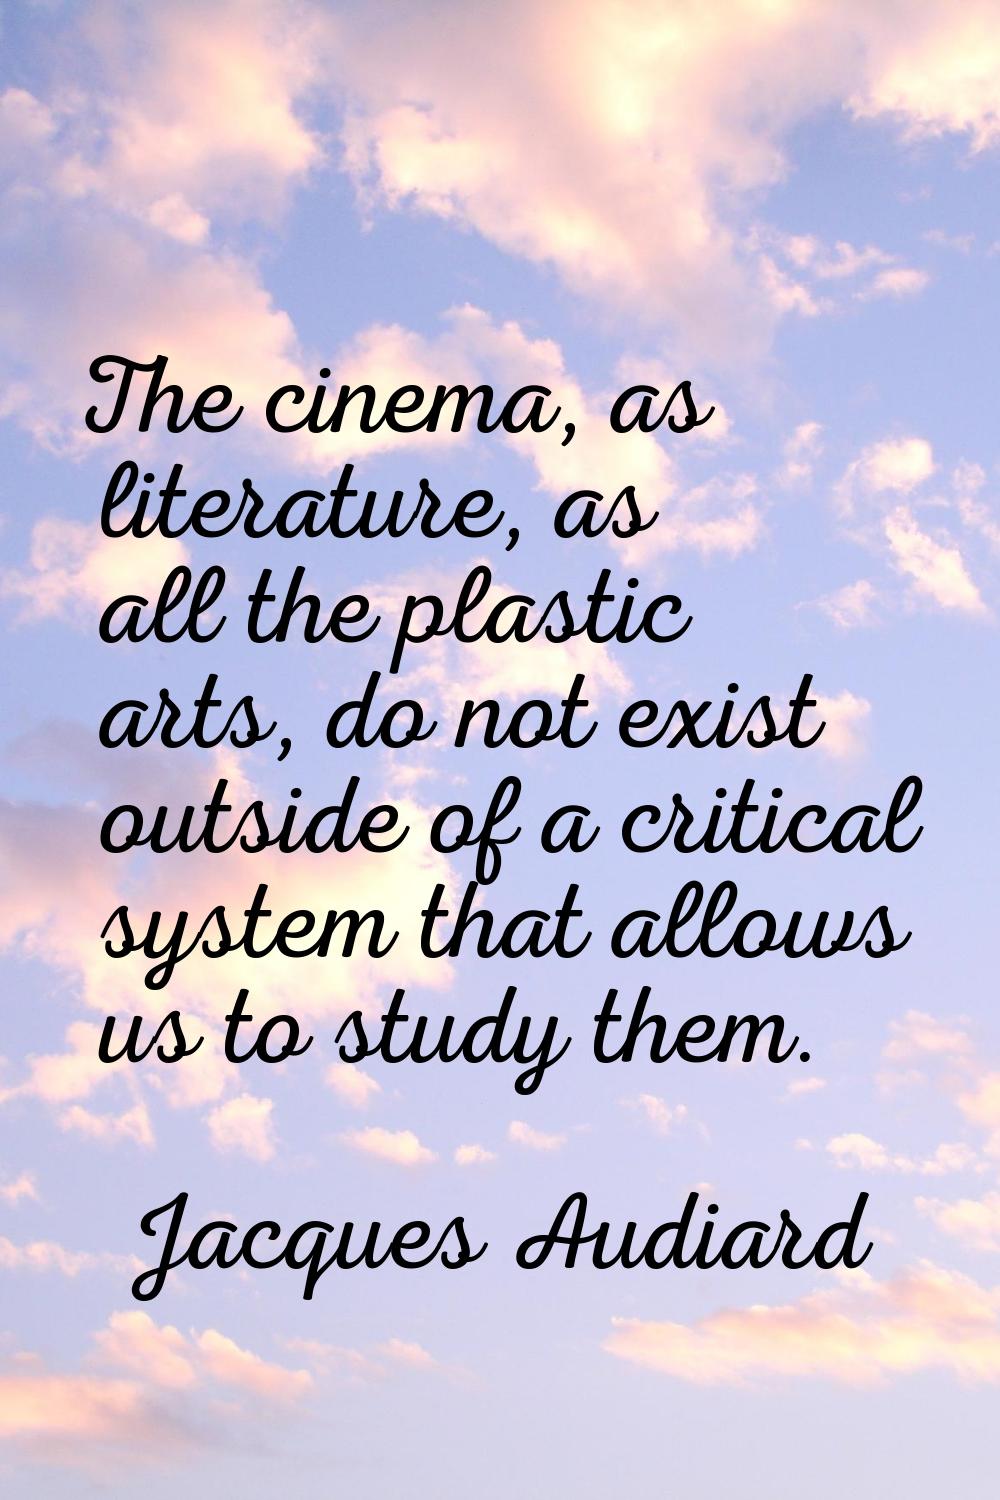 The cinema, as literature, as all the plastic arts, do not exist outside of a critical system that 